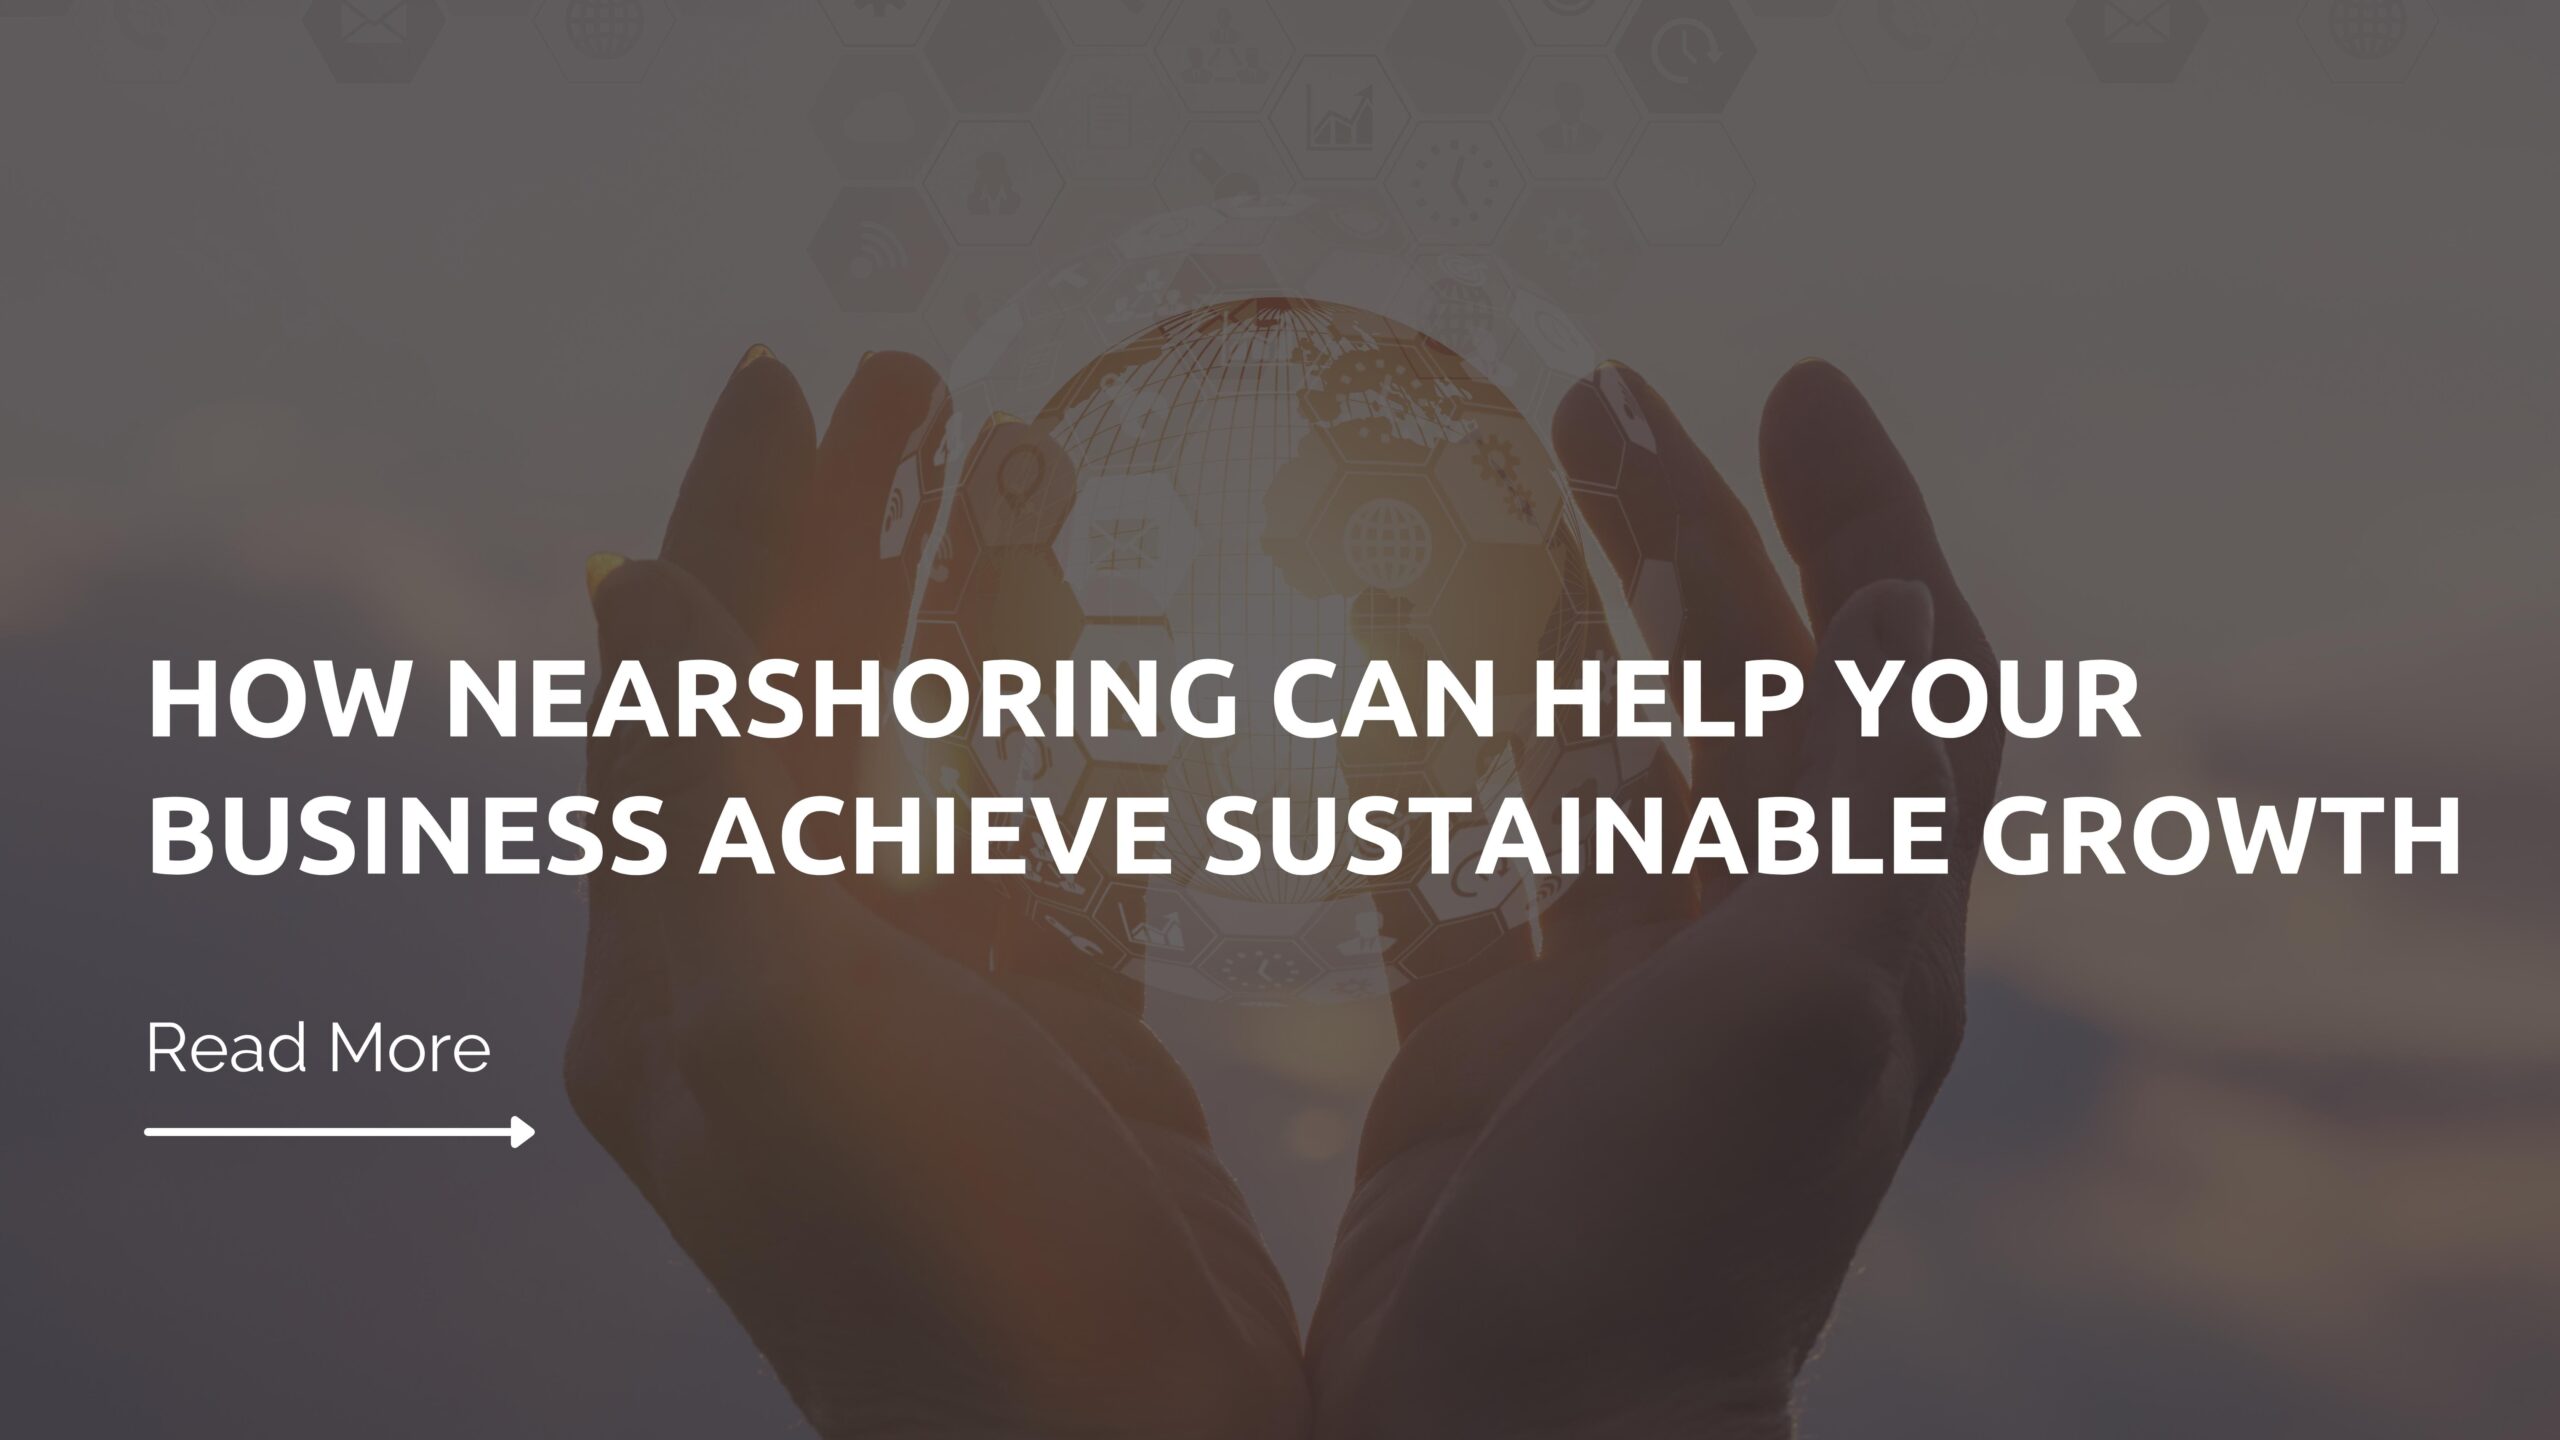 How Nearshoring Can Help Your Business Achieve Sustainable Growth